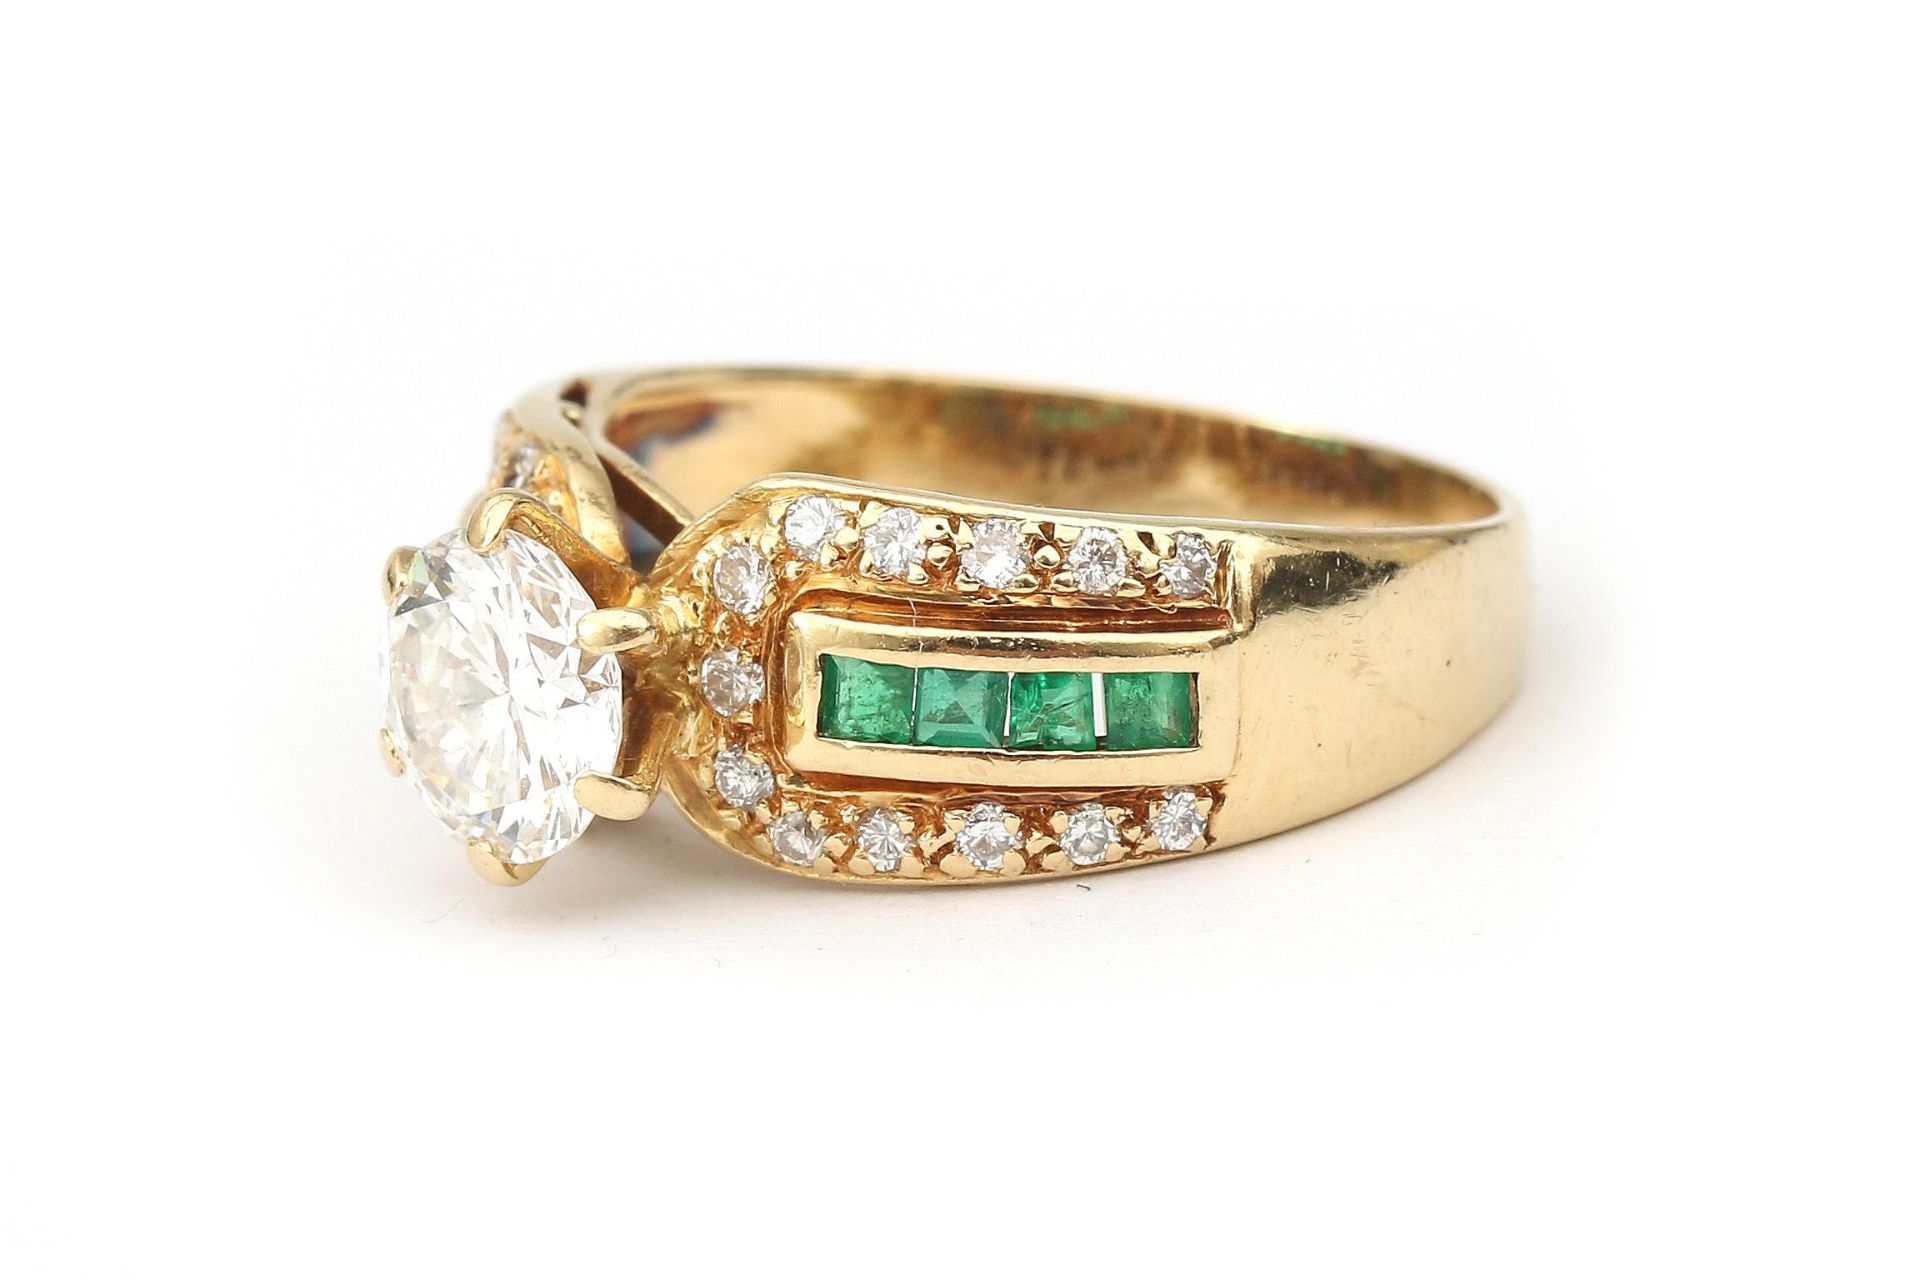 An 18 karat gold emerald and diamond solitaire ring, 1.07 ct. - Image 2 of 4